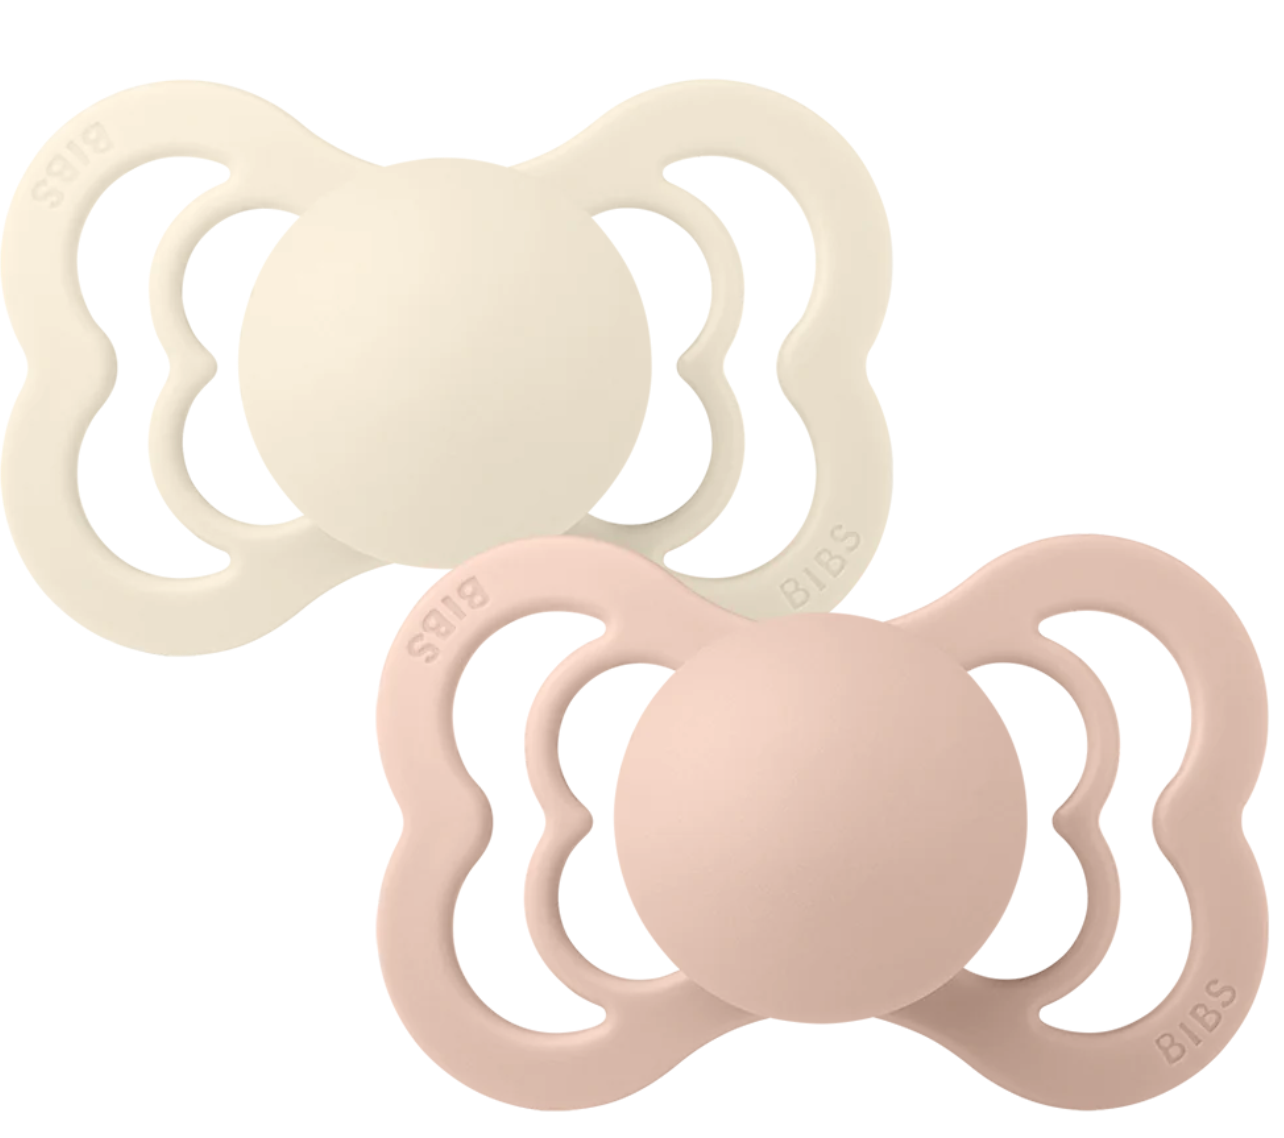 BIBS Pacifiers: Supreme Silicone (2 Pack) - Ivory/Blush